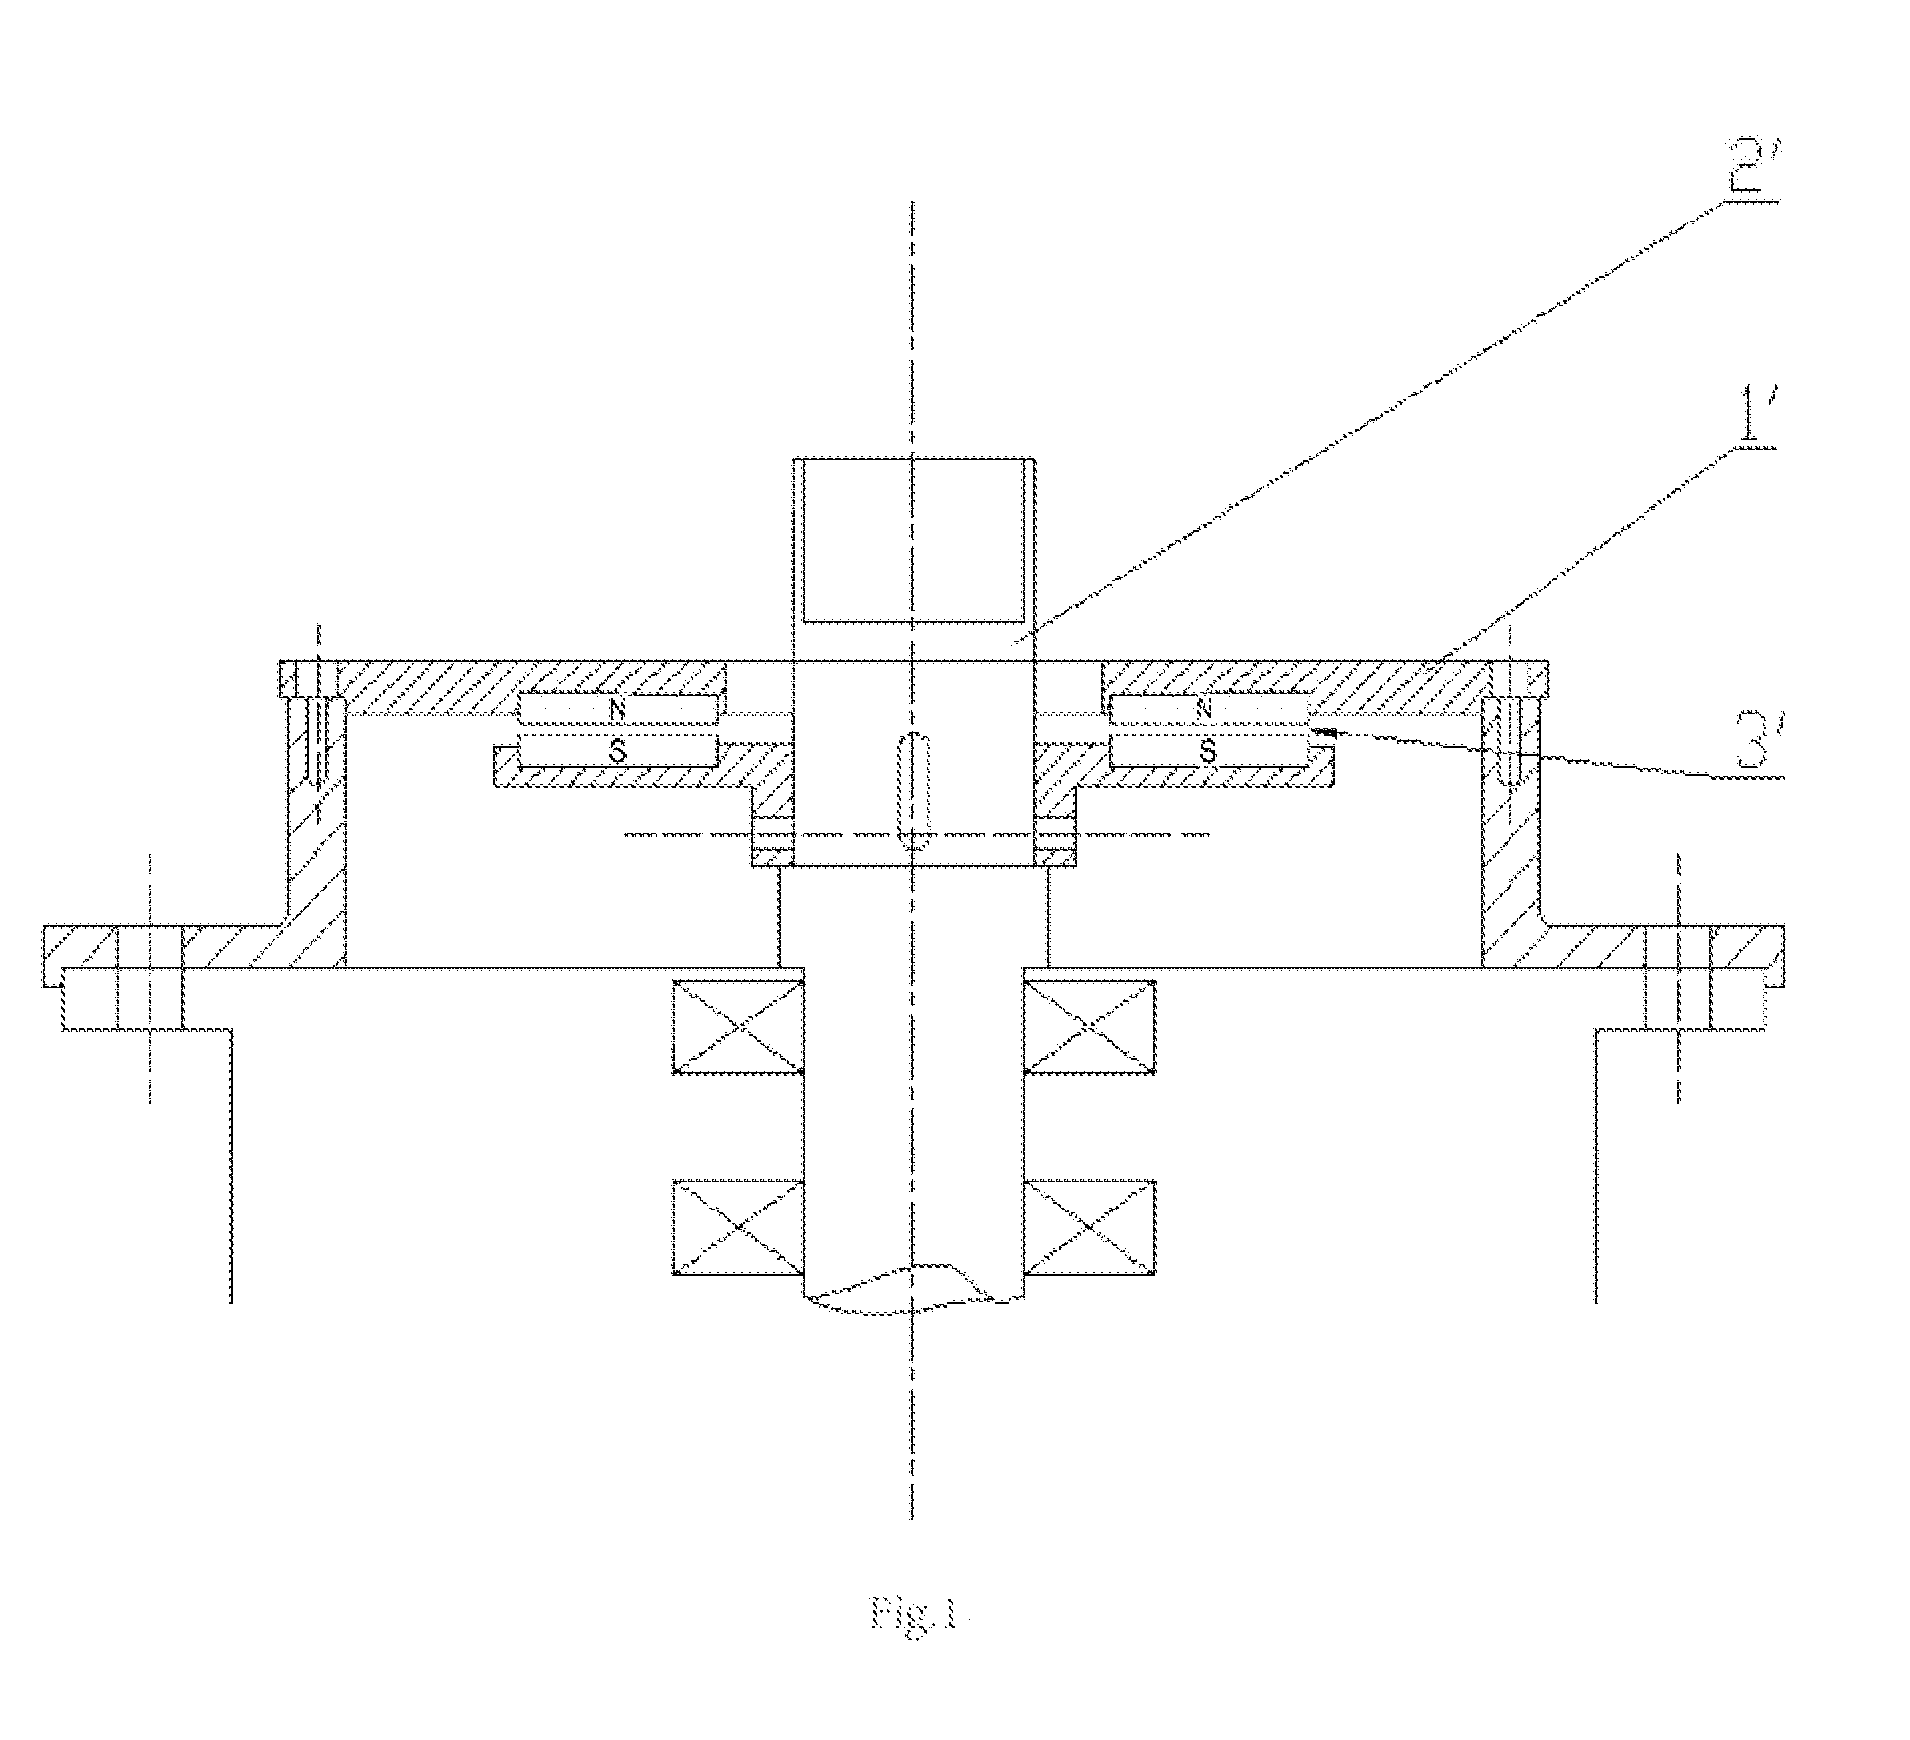 Axial permanent magnetic suspension bearing having micro-friction or no friction of pivot point